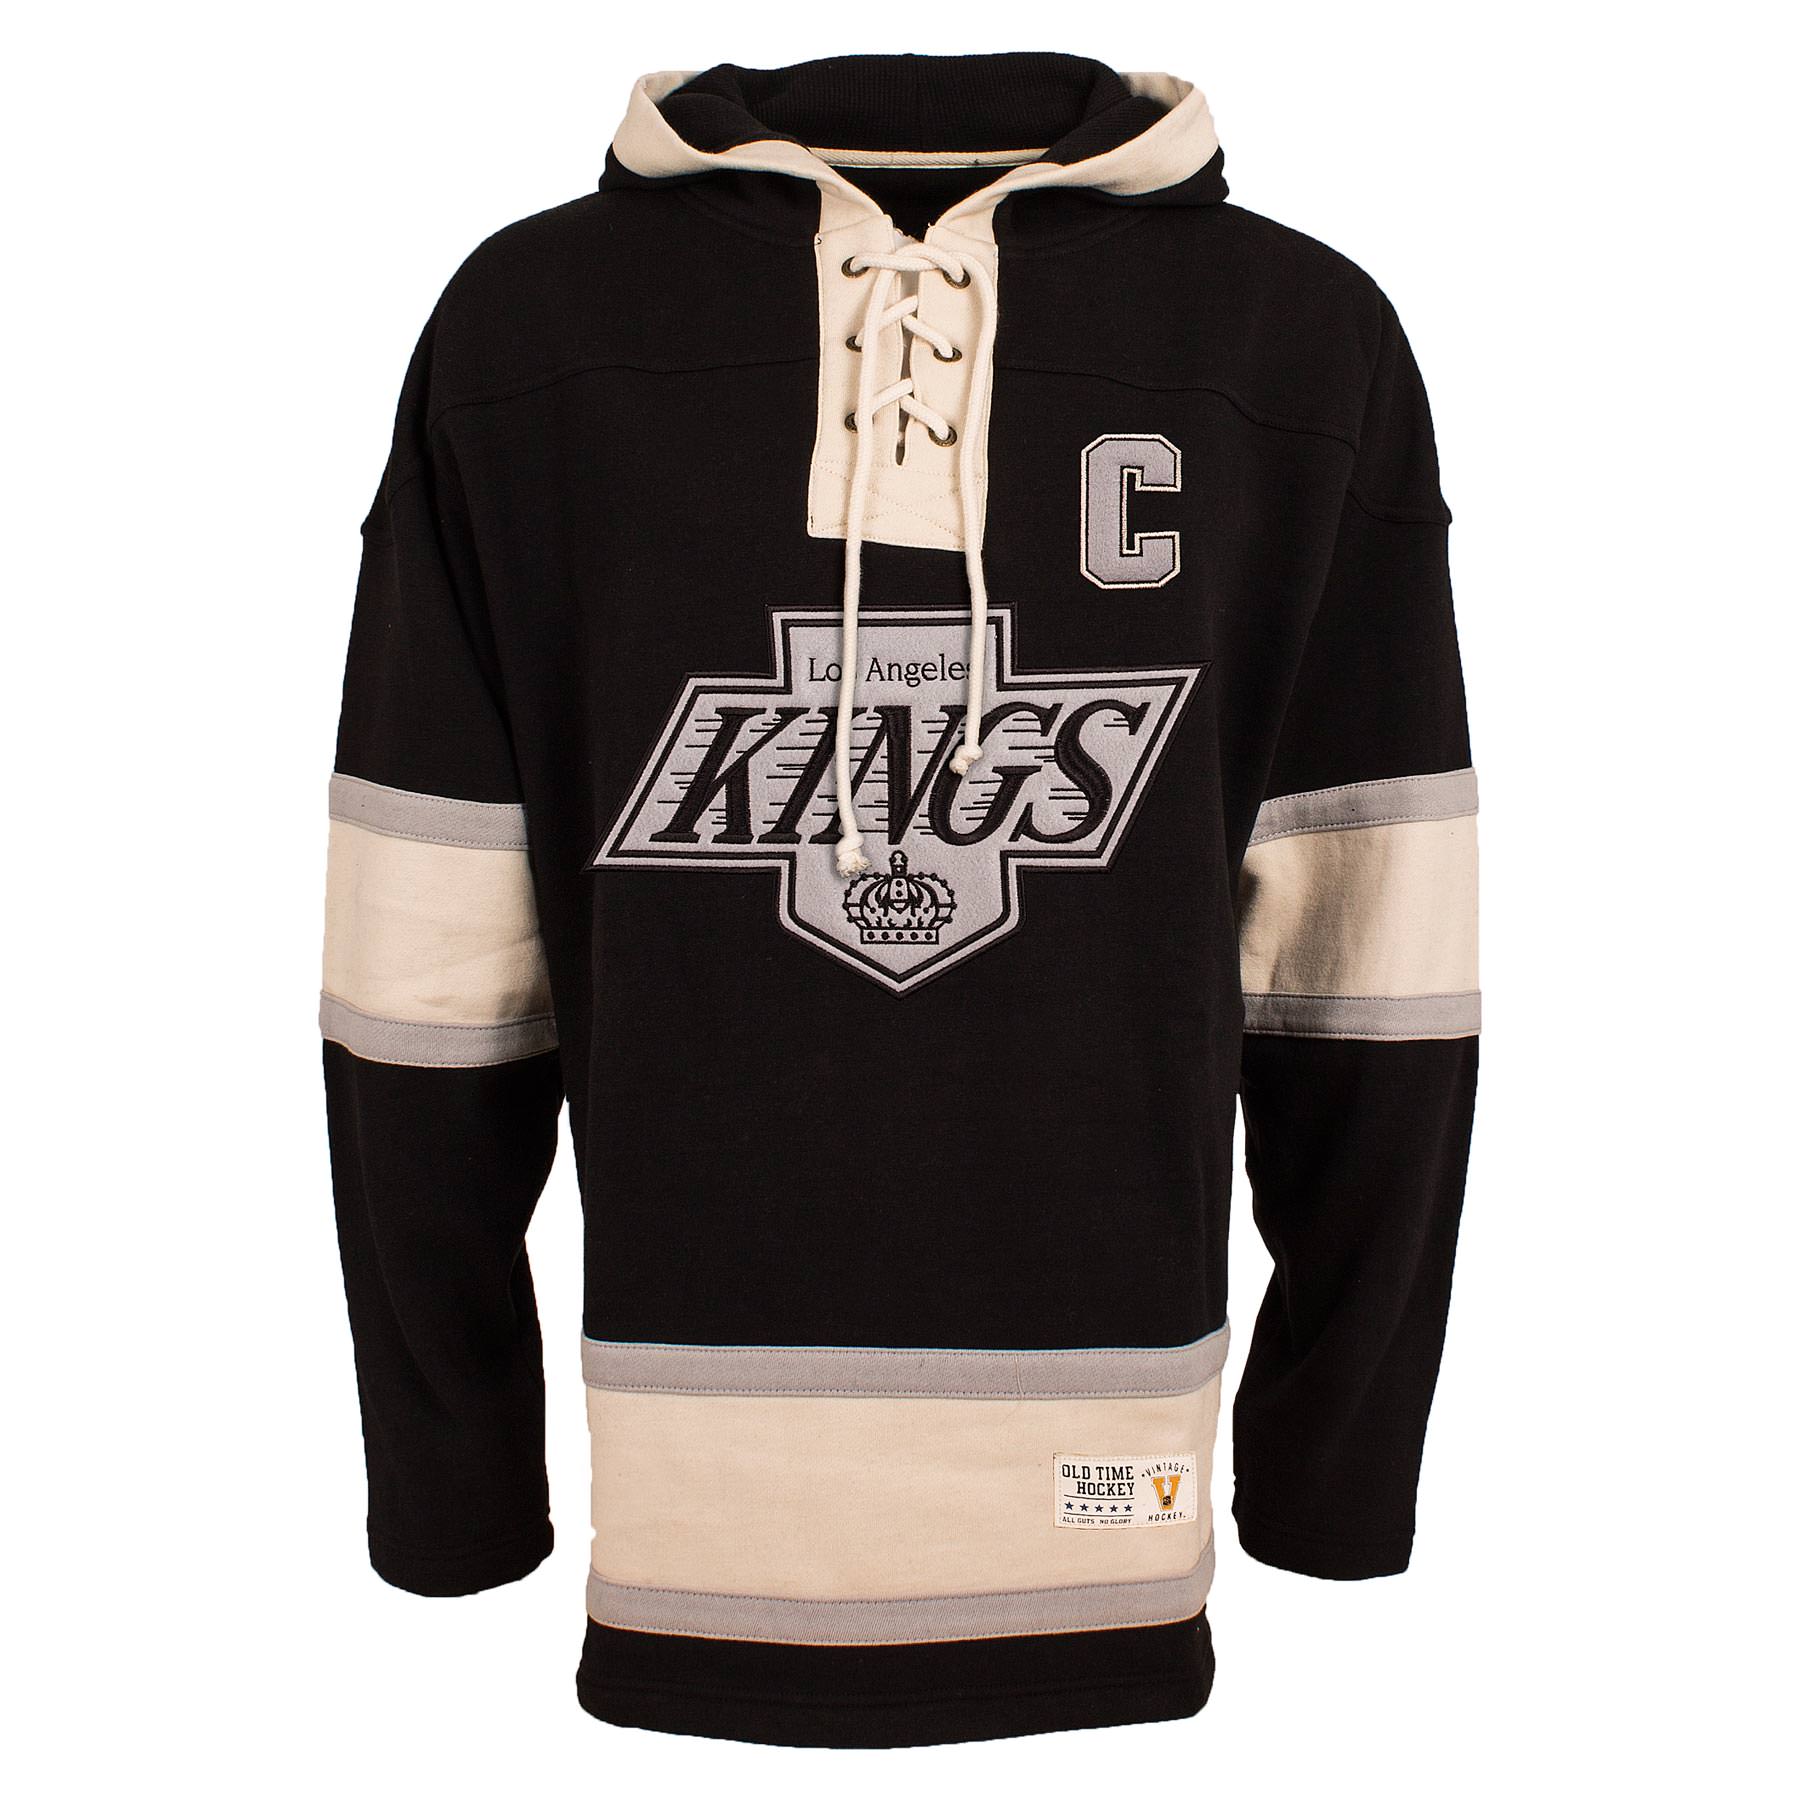 old-time-hockey-gretzky-kings-lacer-jersey